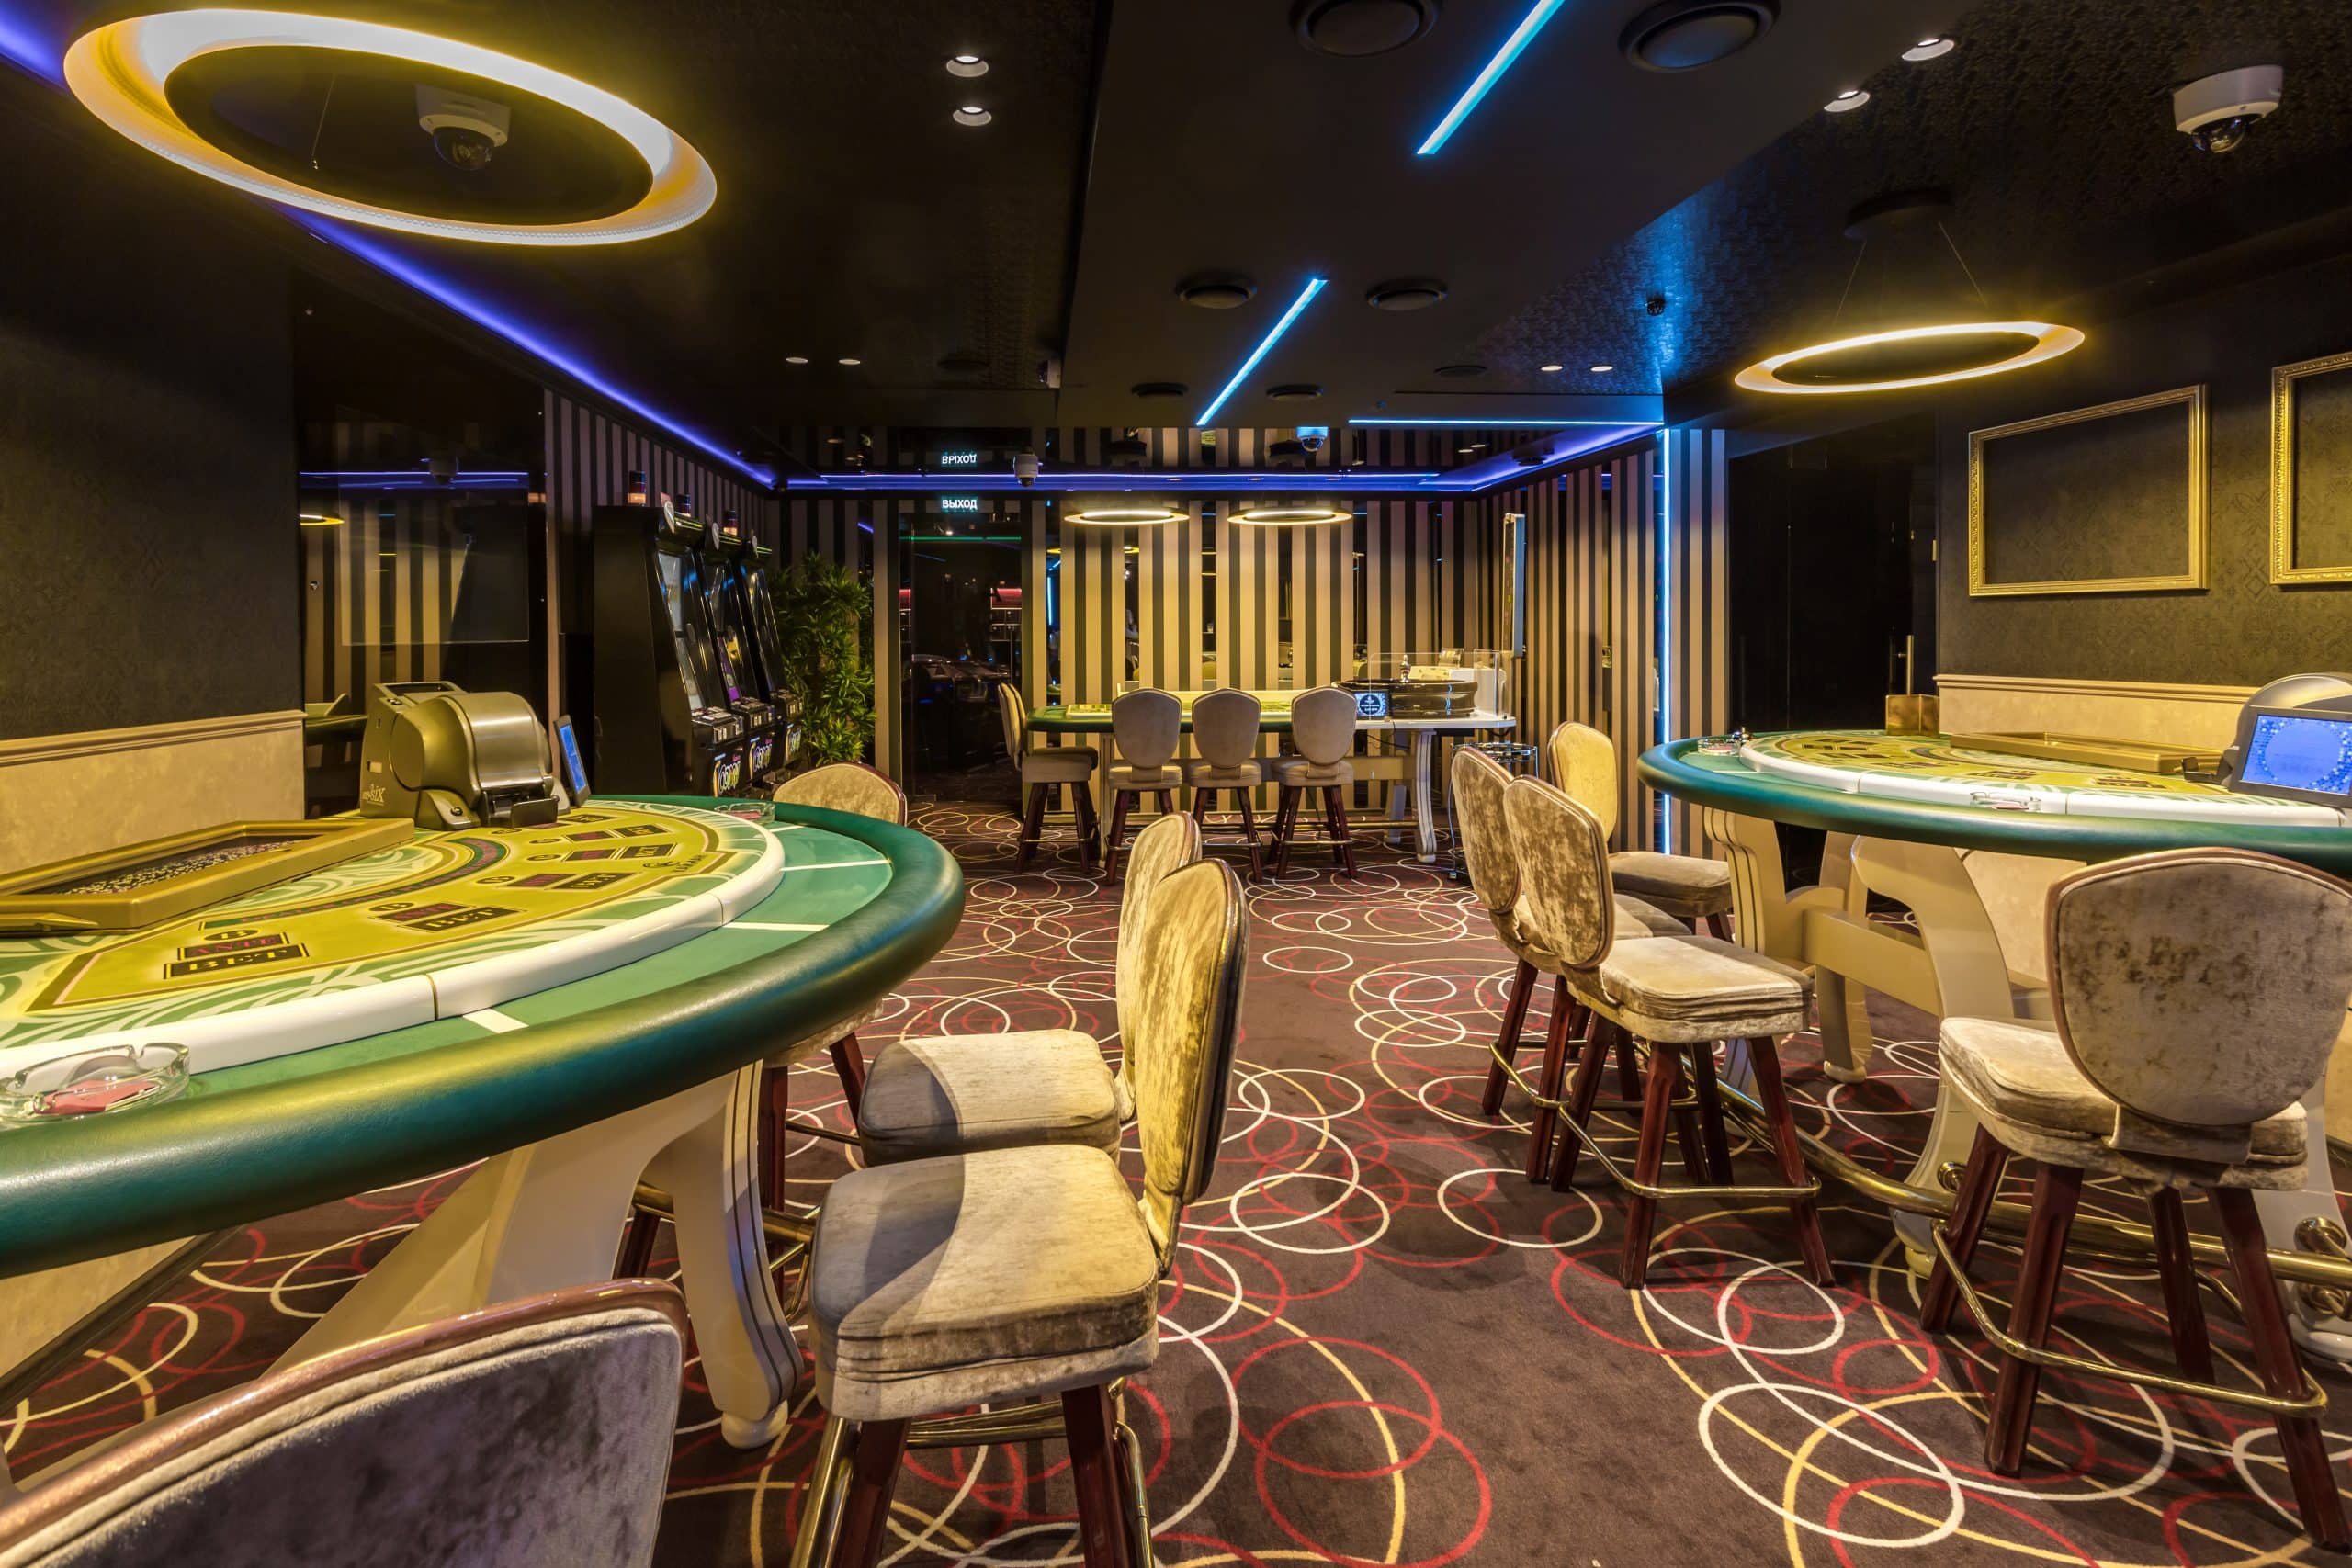 las vegas usa may 2017 interior elite luxury vip casino with poker tables scaled